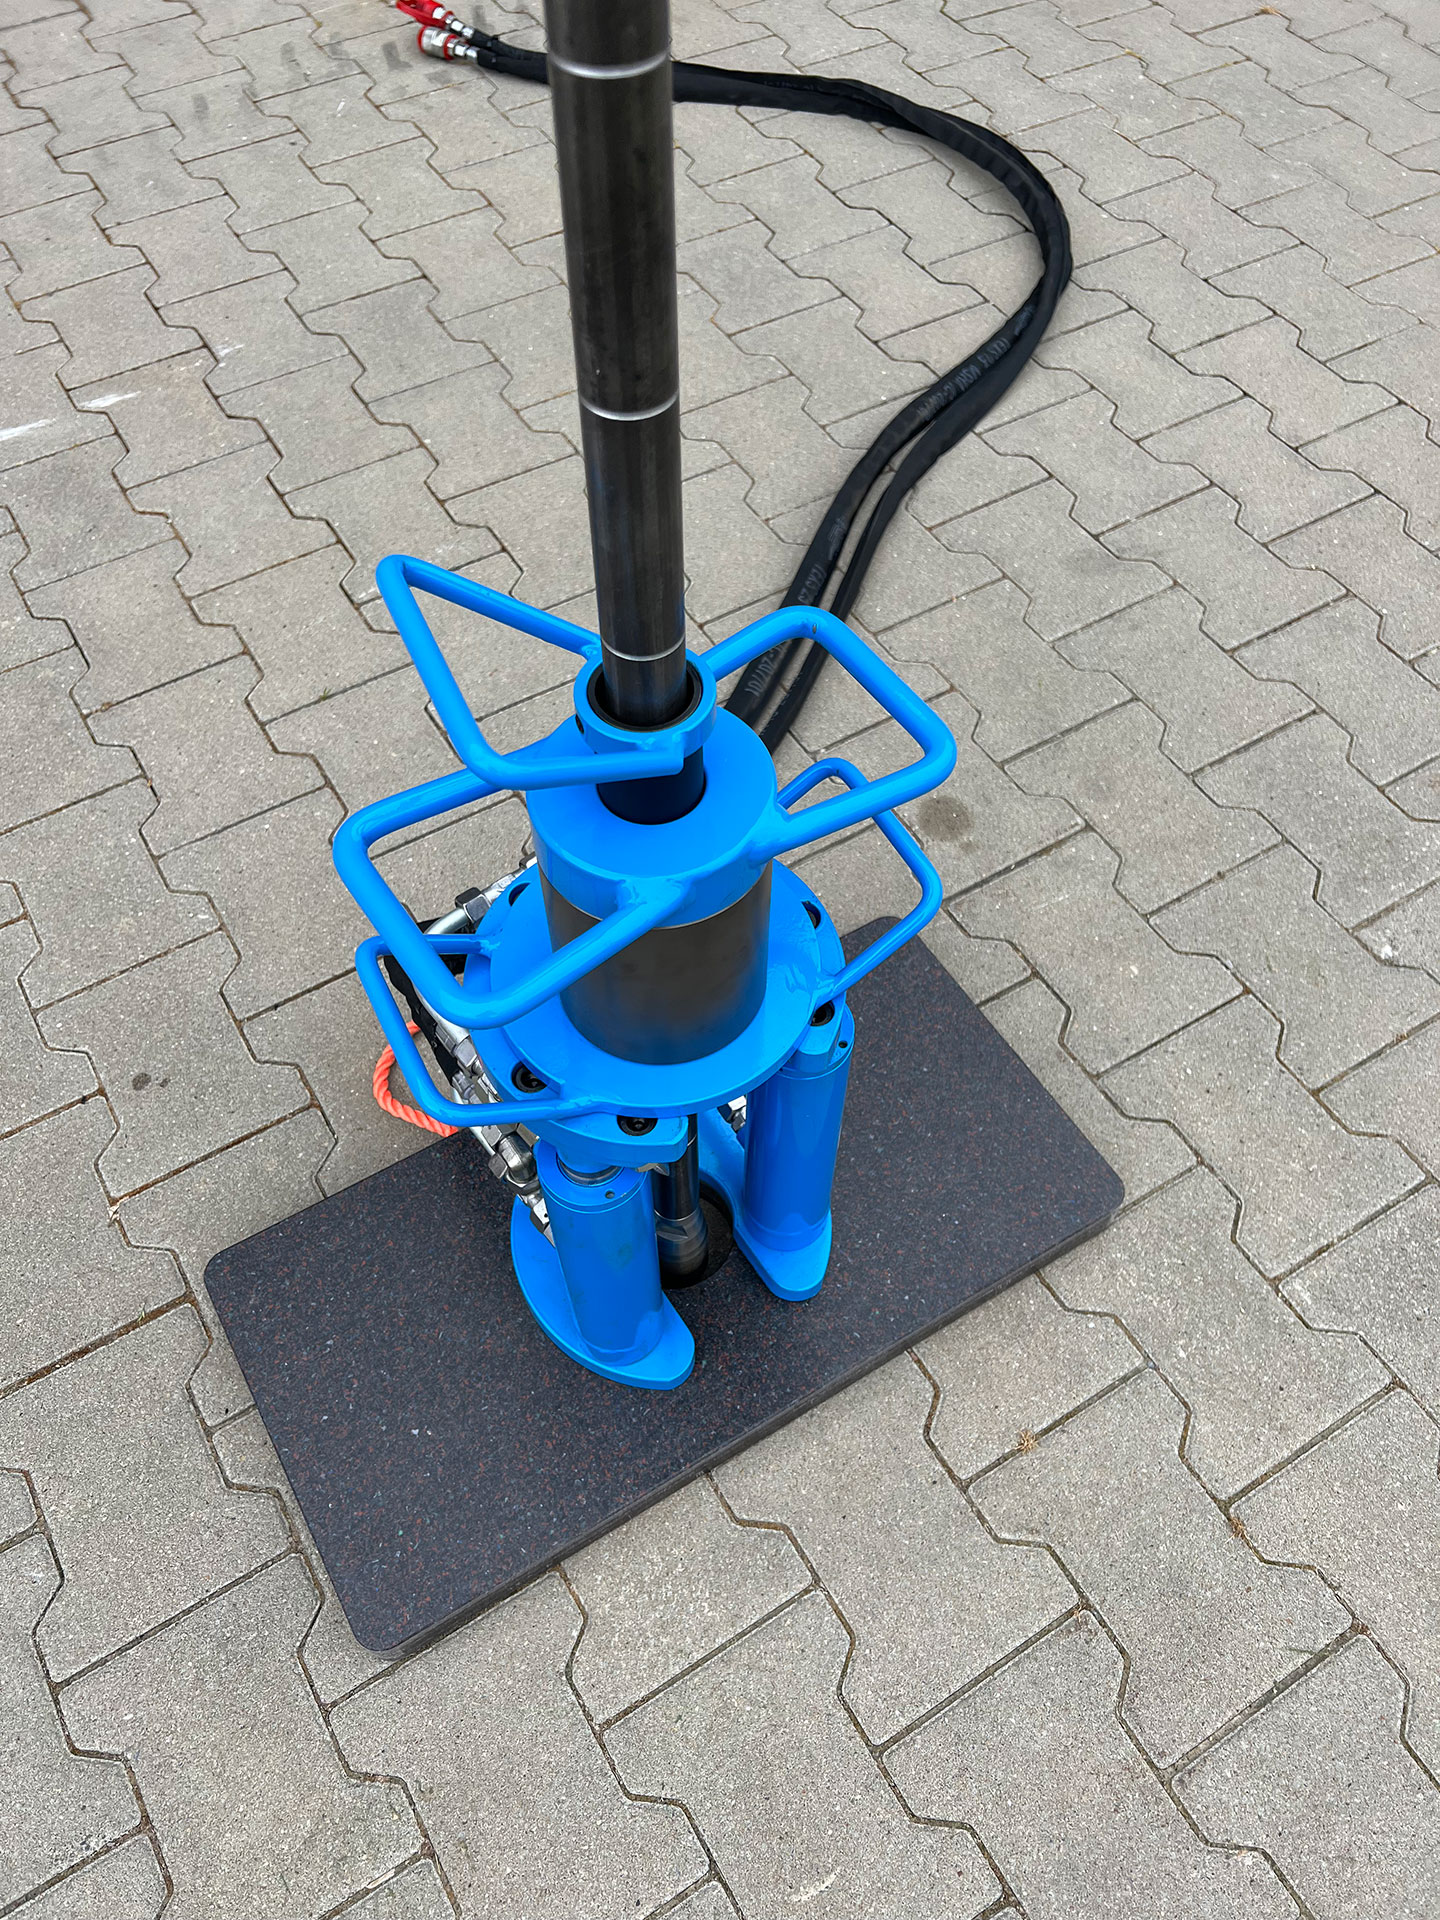 Lifting unit with ball clamp for pulling the pile-driving or pile-coring tools.